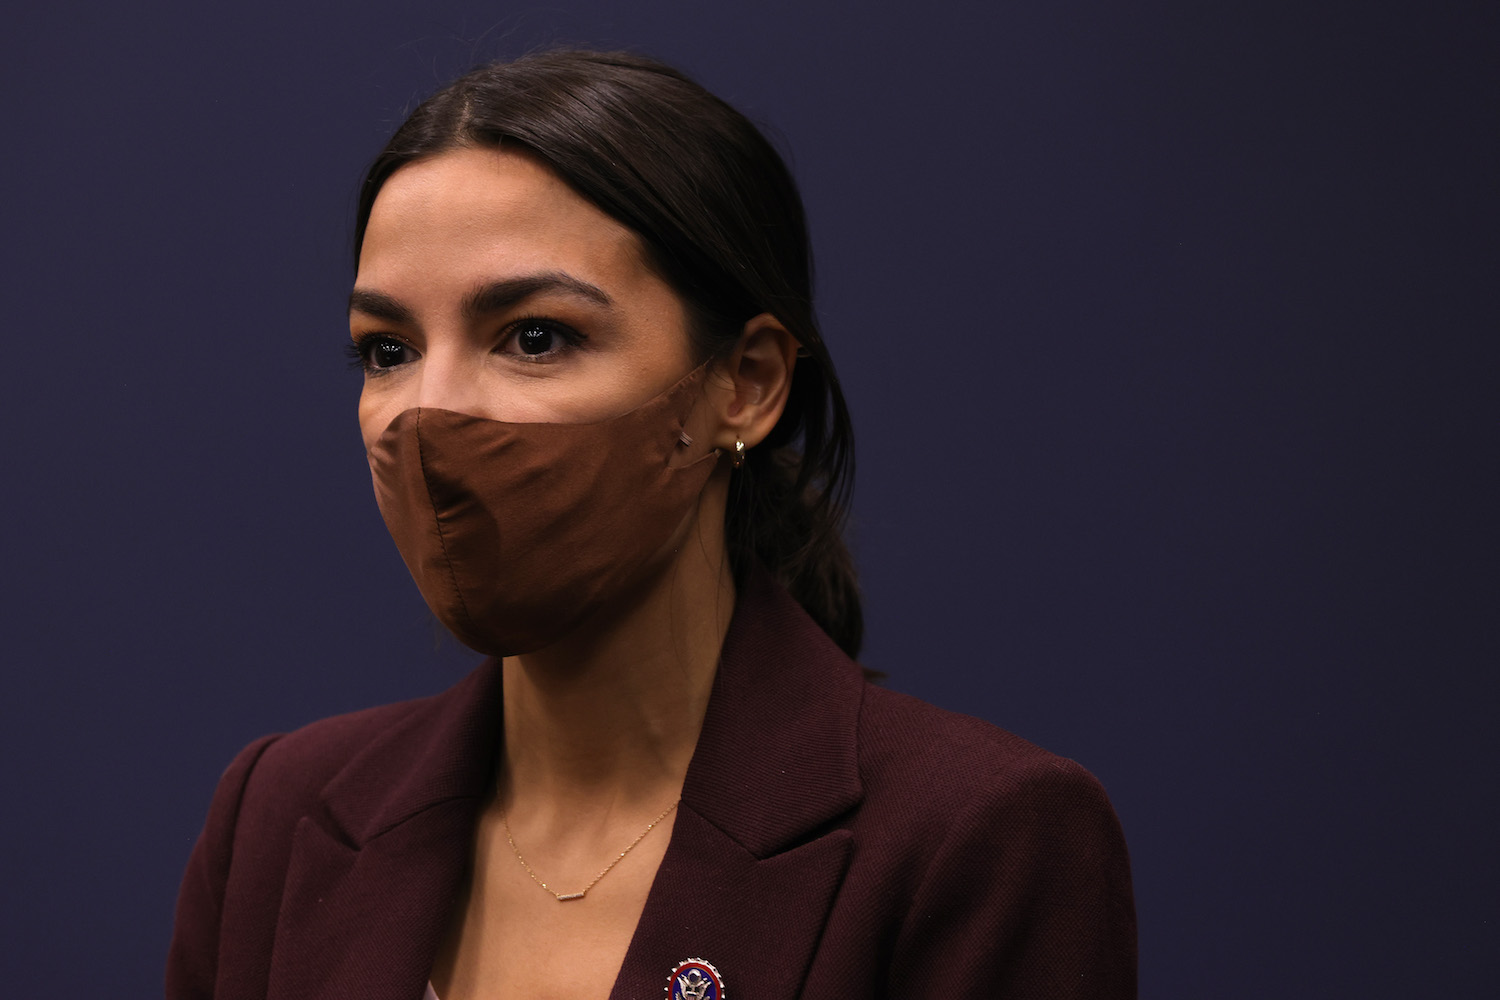 According to Rep. AOC, this sort of comparison should stop. Photo: Photo: Alex Wong/Getty Images.
 
